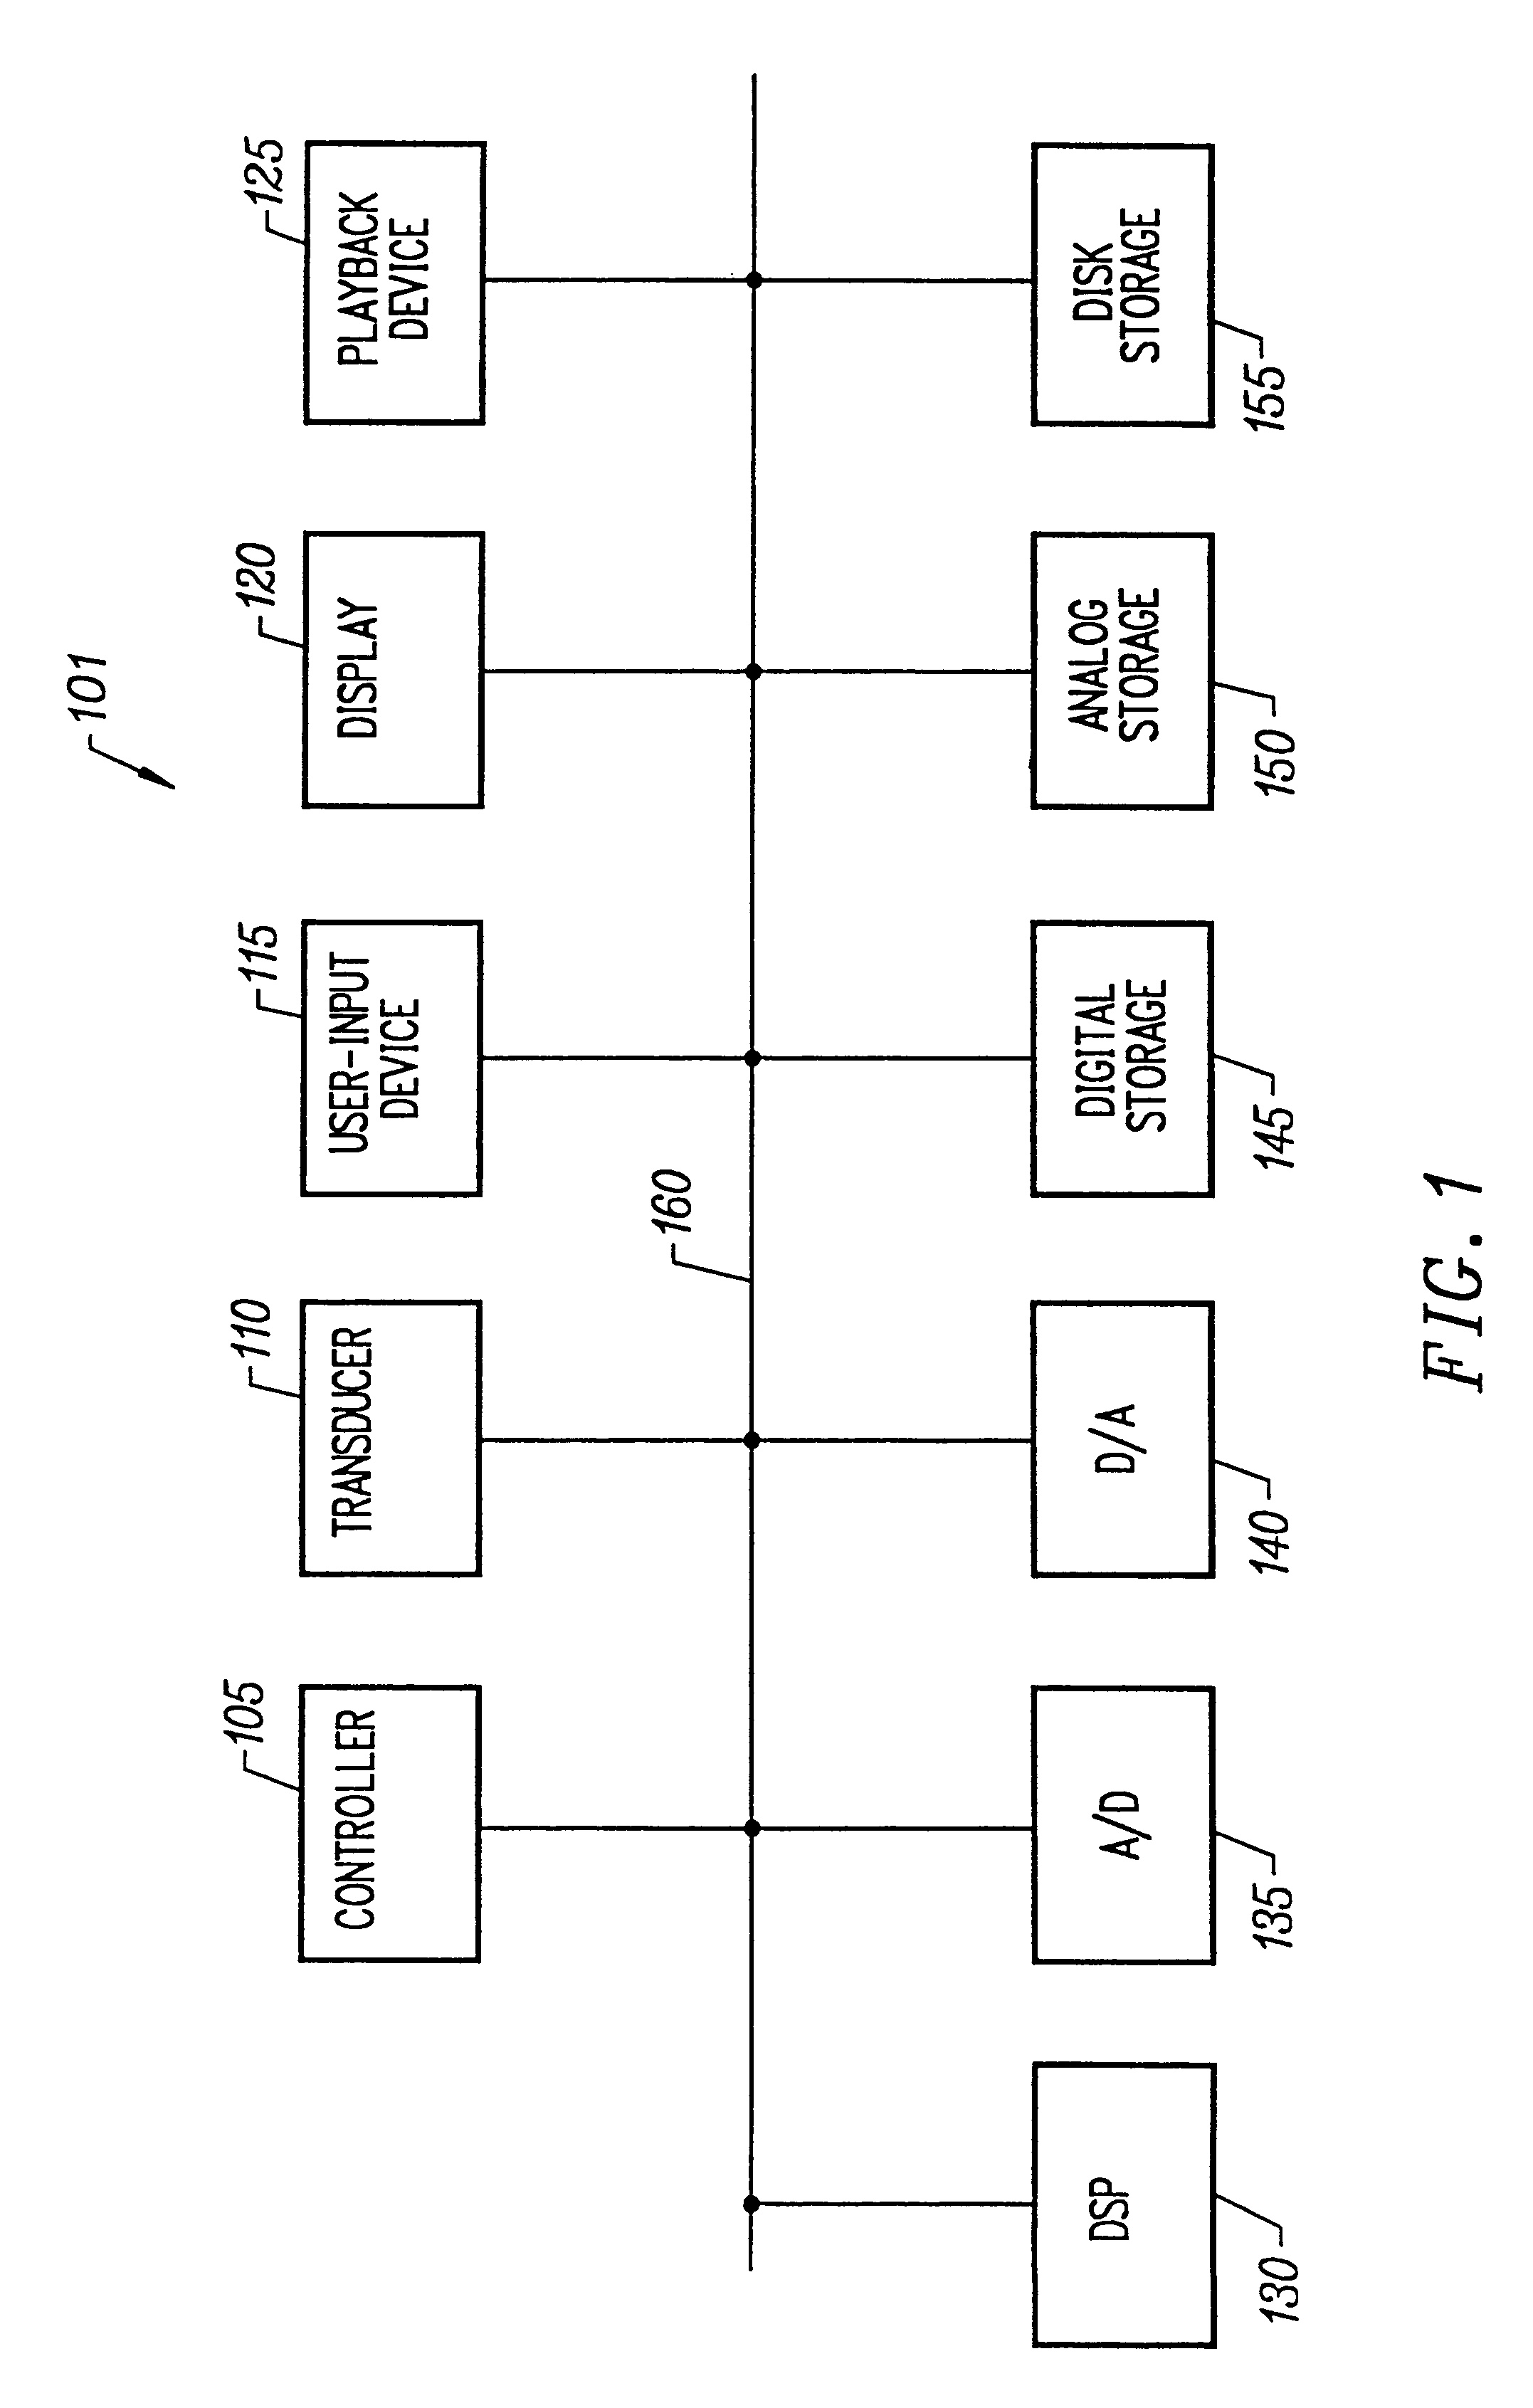 Charge pump circuit adjustable in response to an external voltage source